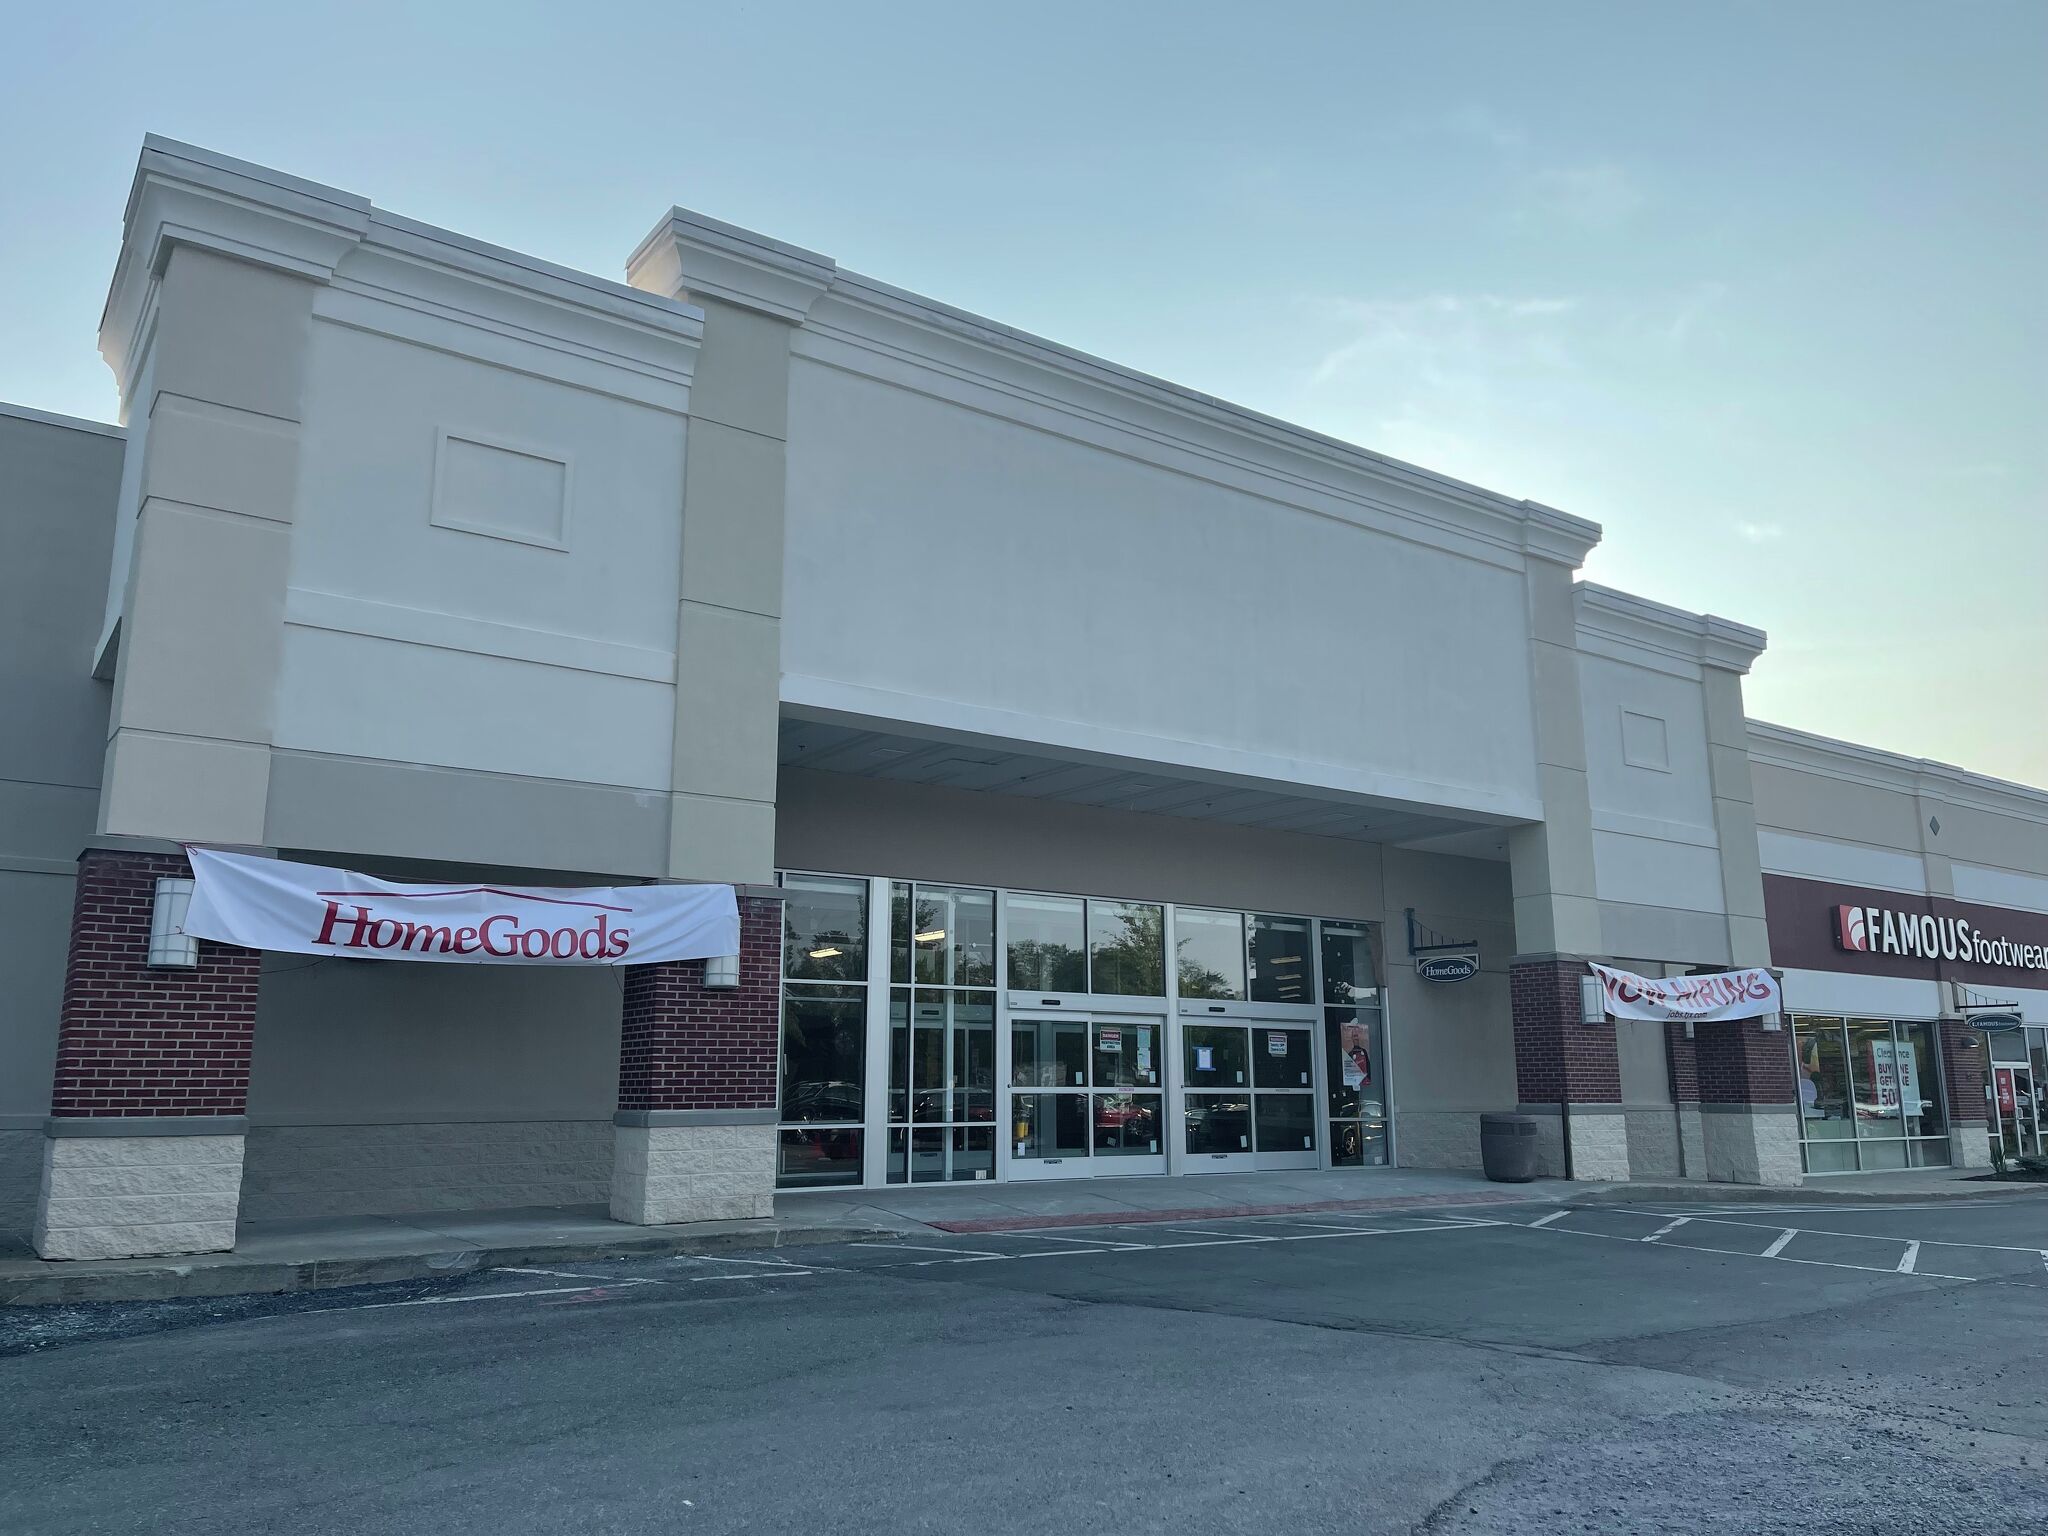 HomeGoods to open new location in Scarsdale later this month